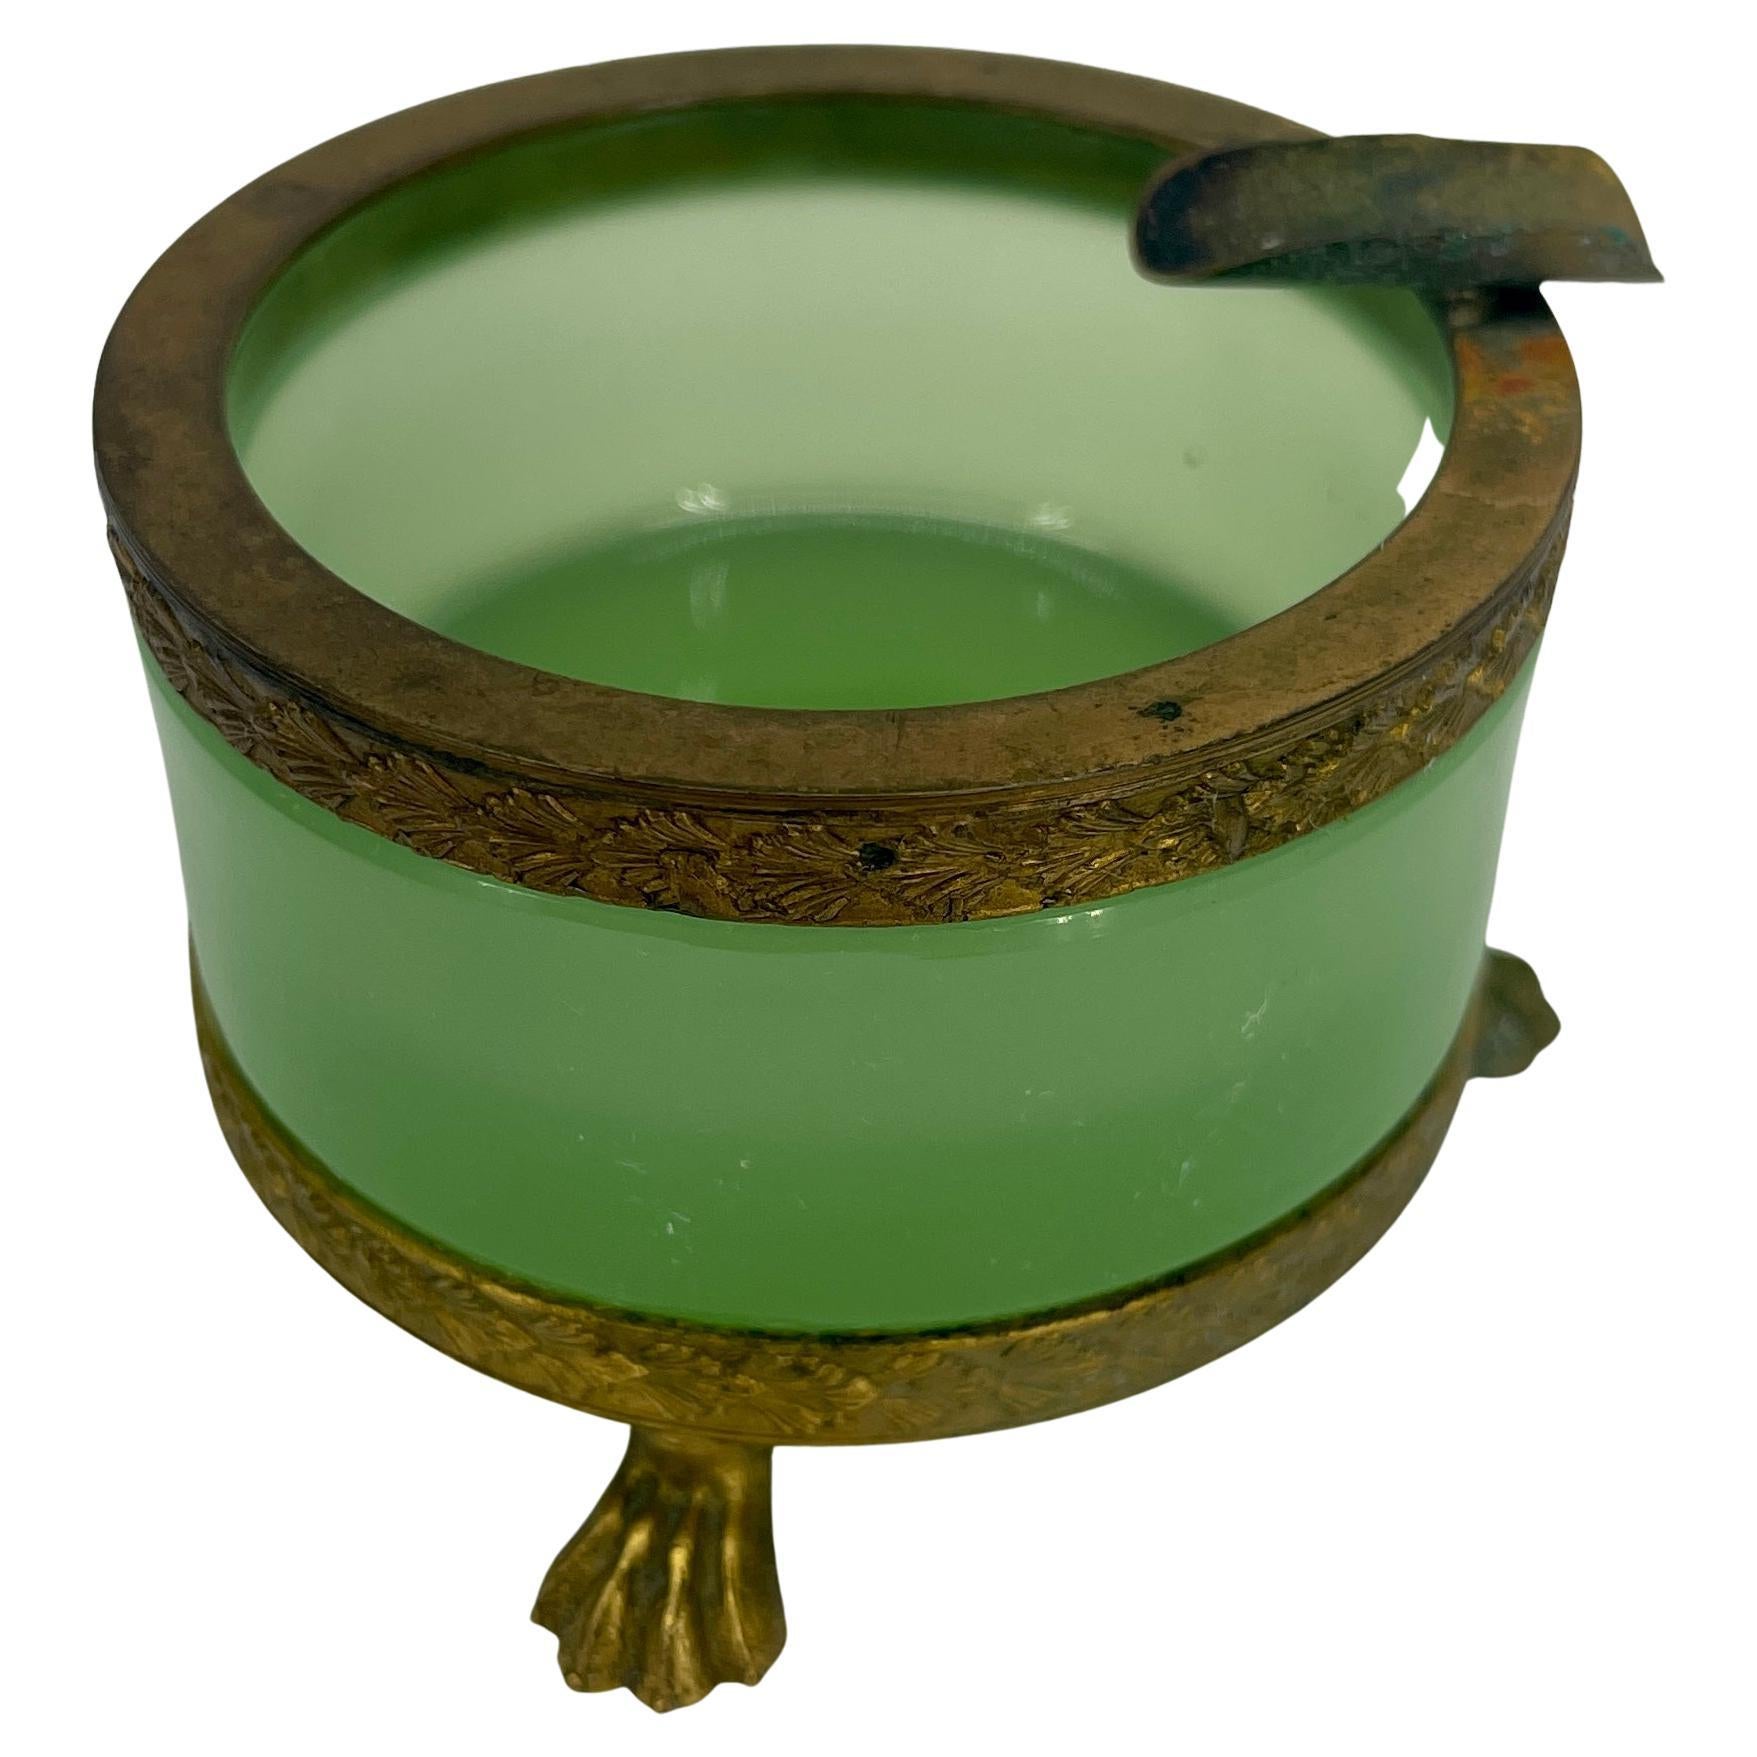 Exquisite French green opaline ashtray, circa early 1920's. 
This petite round green opaline ashtray is flanked by three brass splay feet. It is elegant and graceful. The opaline glass is in very good condition and is a perfect addition to a bar or